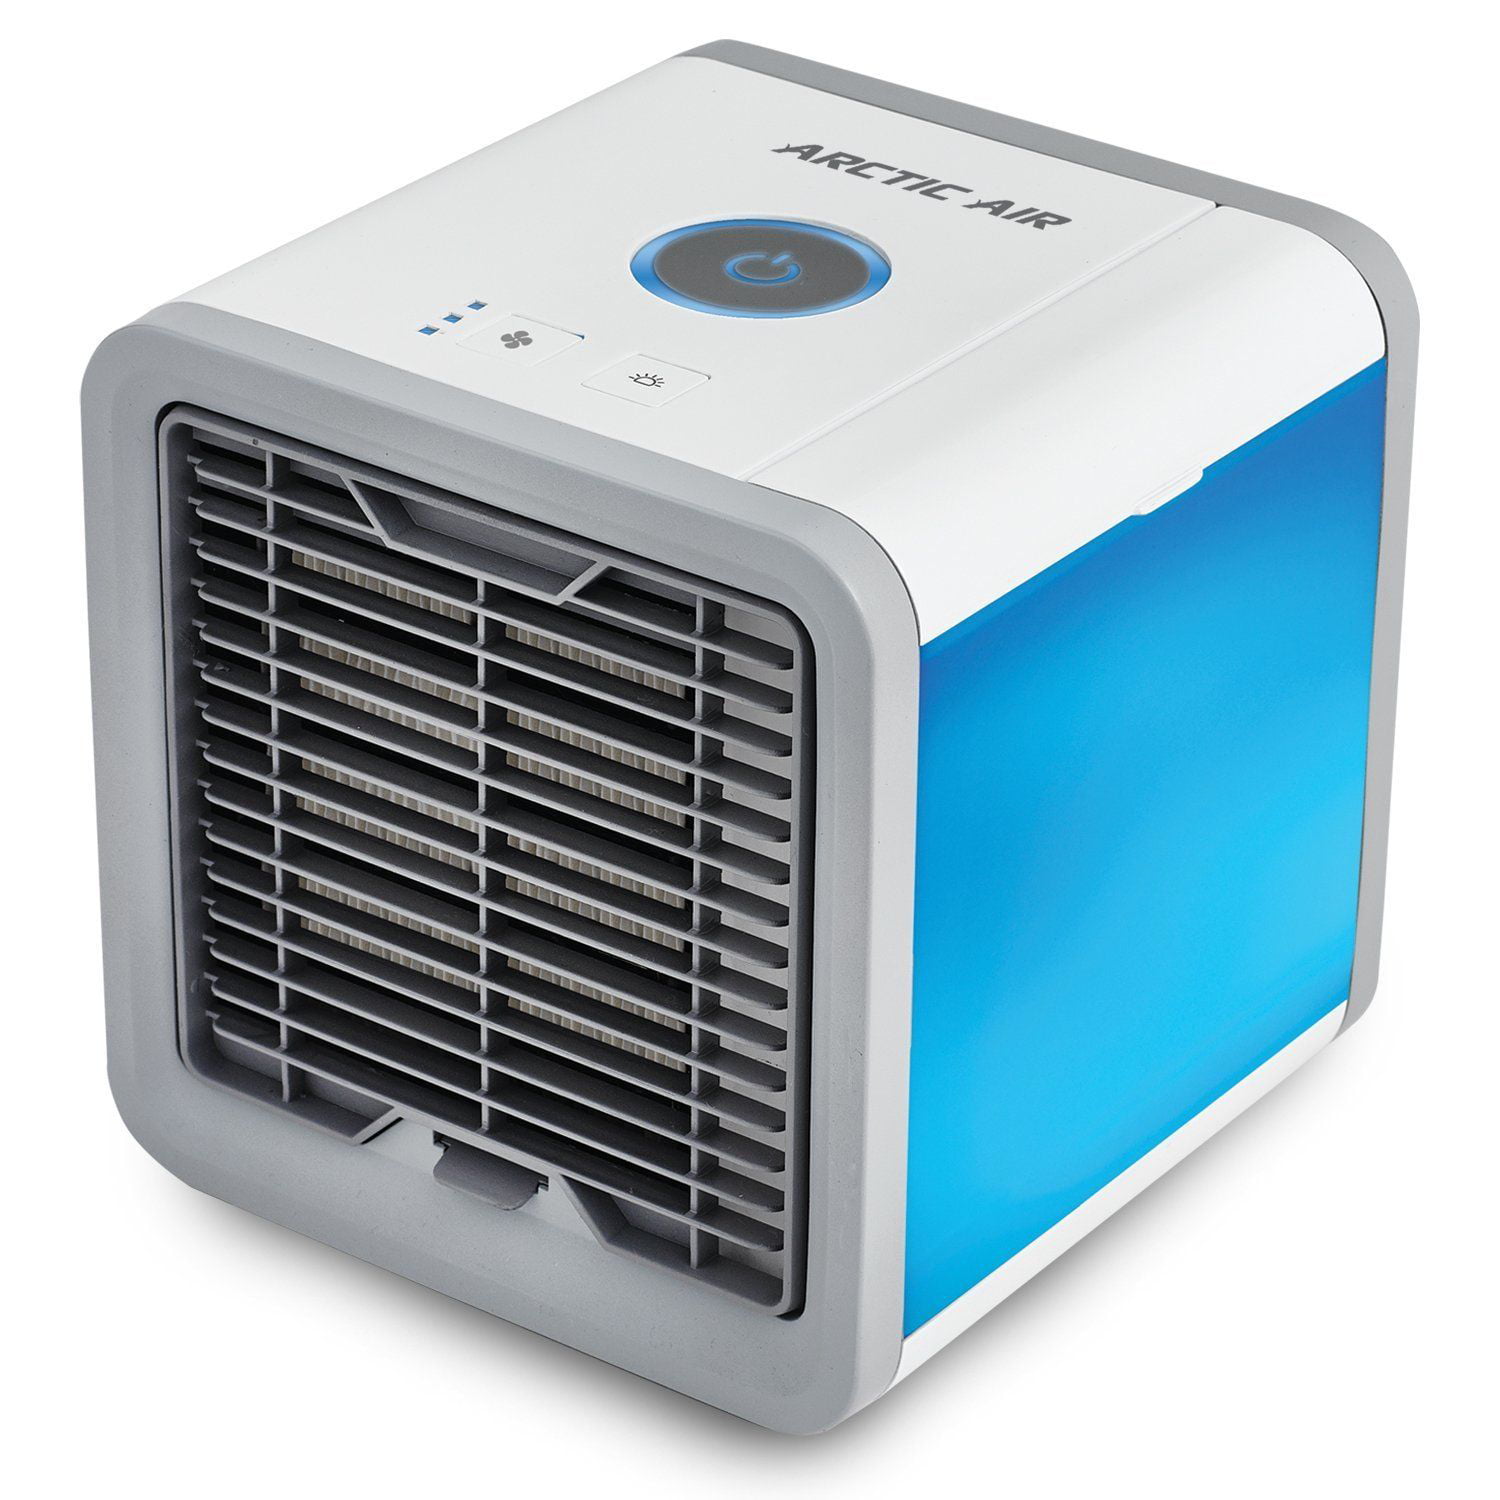 Mini Desktop Air Conditioner USB Rechargeable Small Fan Cooling Portable Cooler